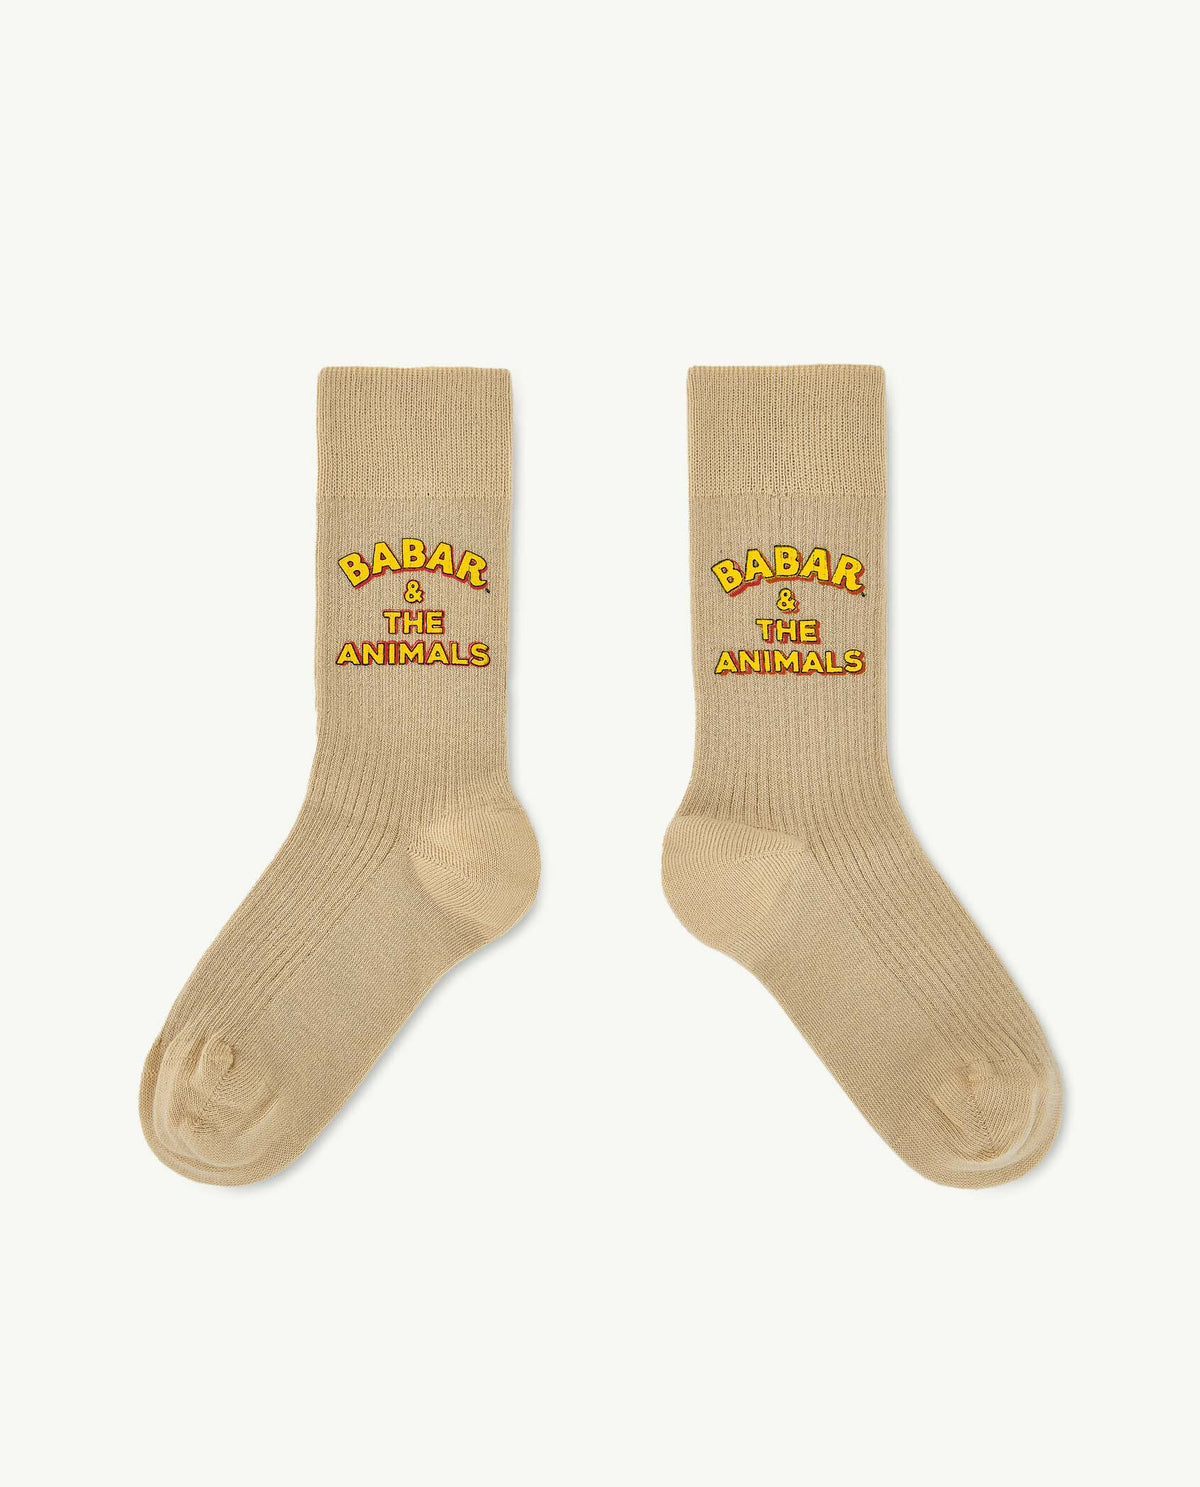 the animals observatory babar & the animals worm socks - offwhite